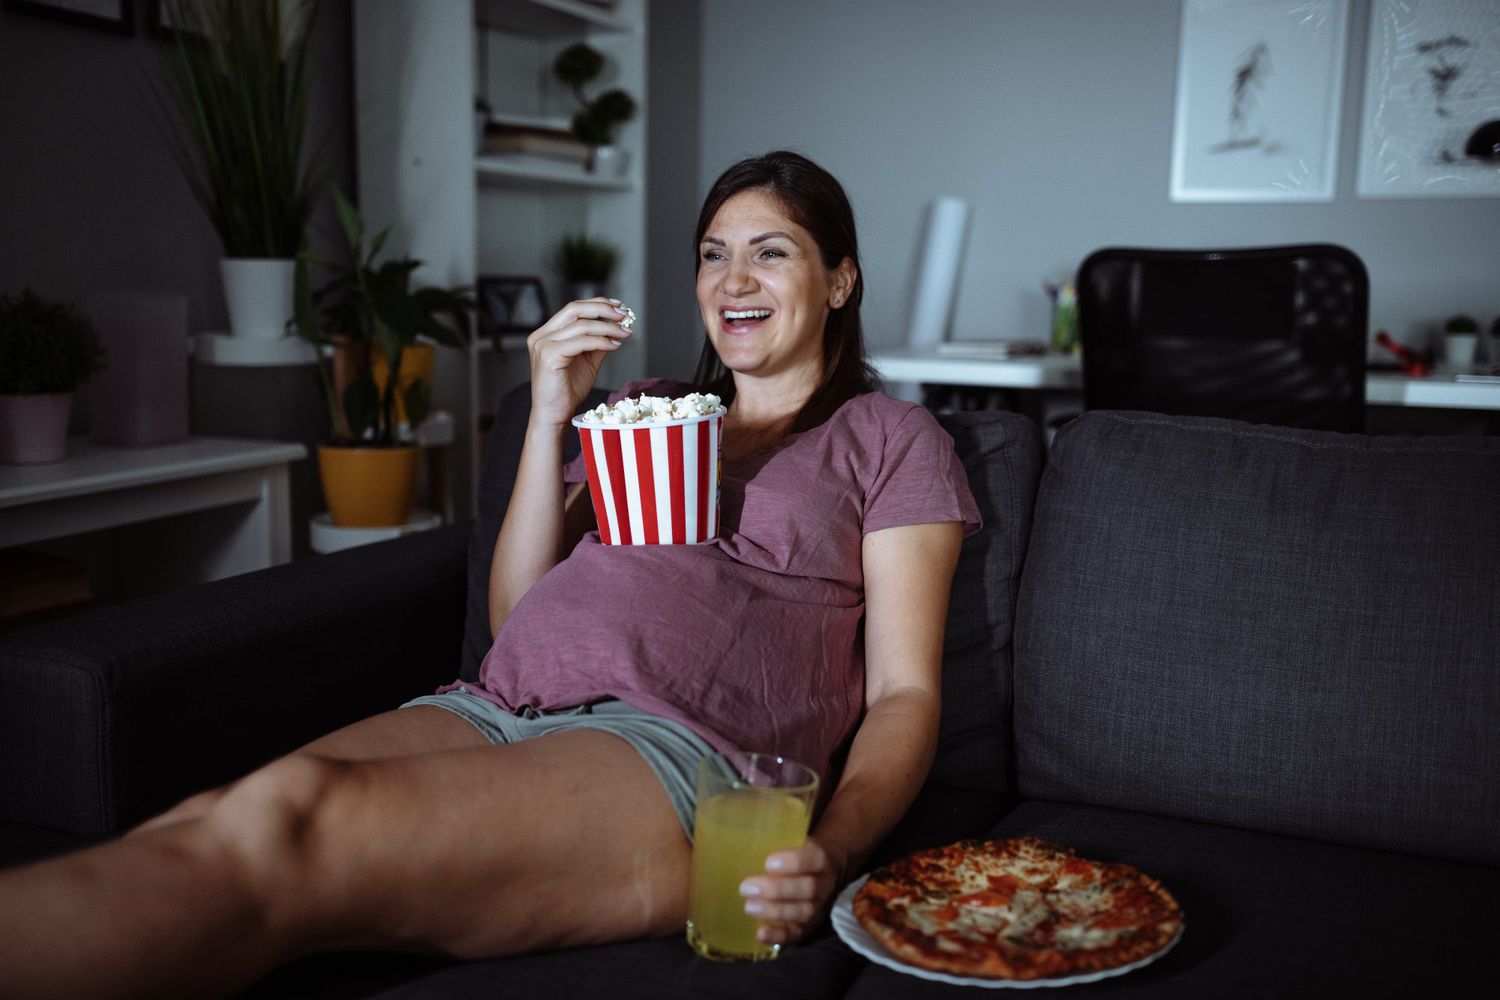 Pregnant woman eating junk food and watching TV - overeating during pregnancy